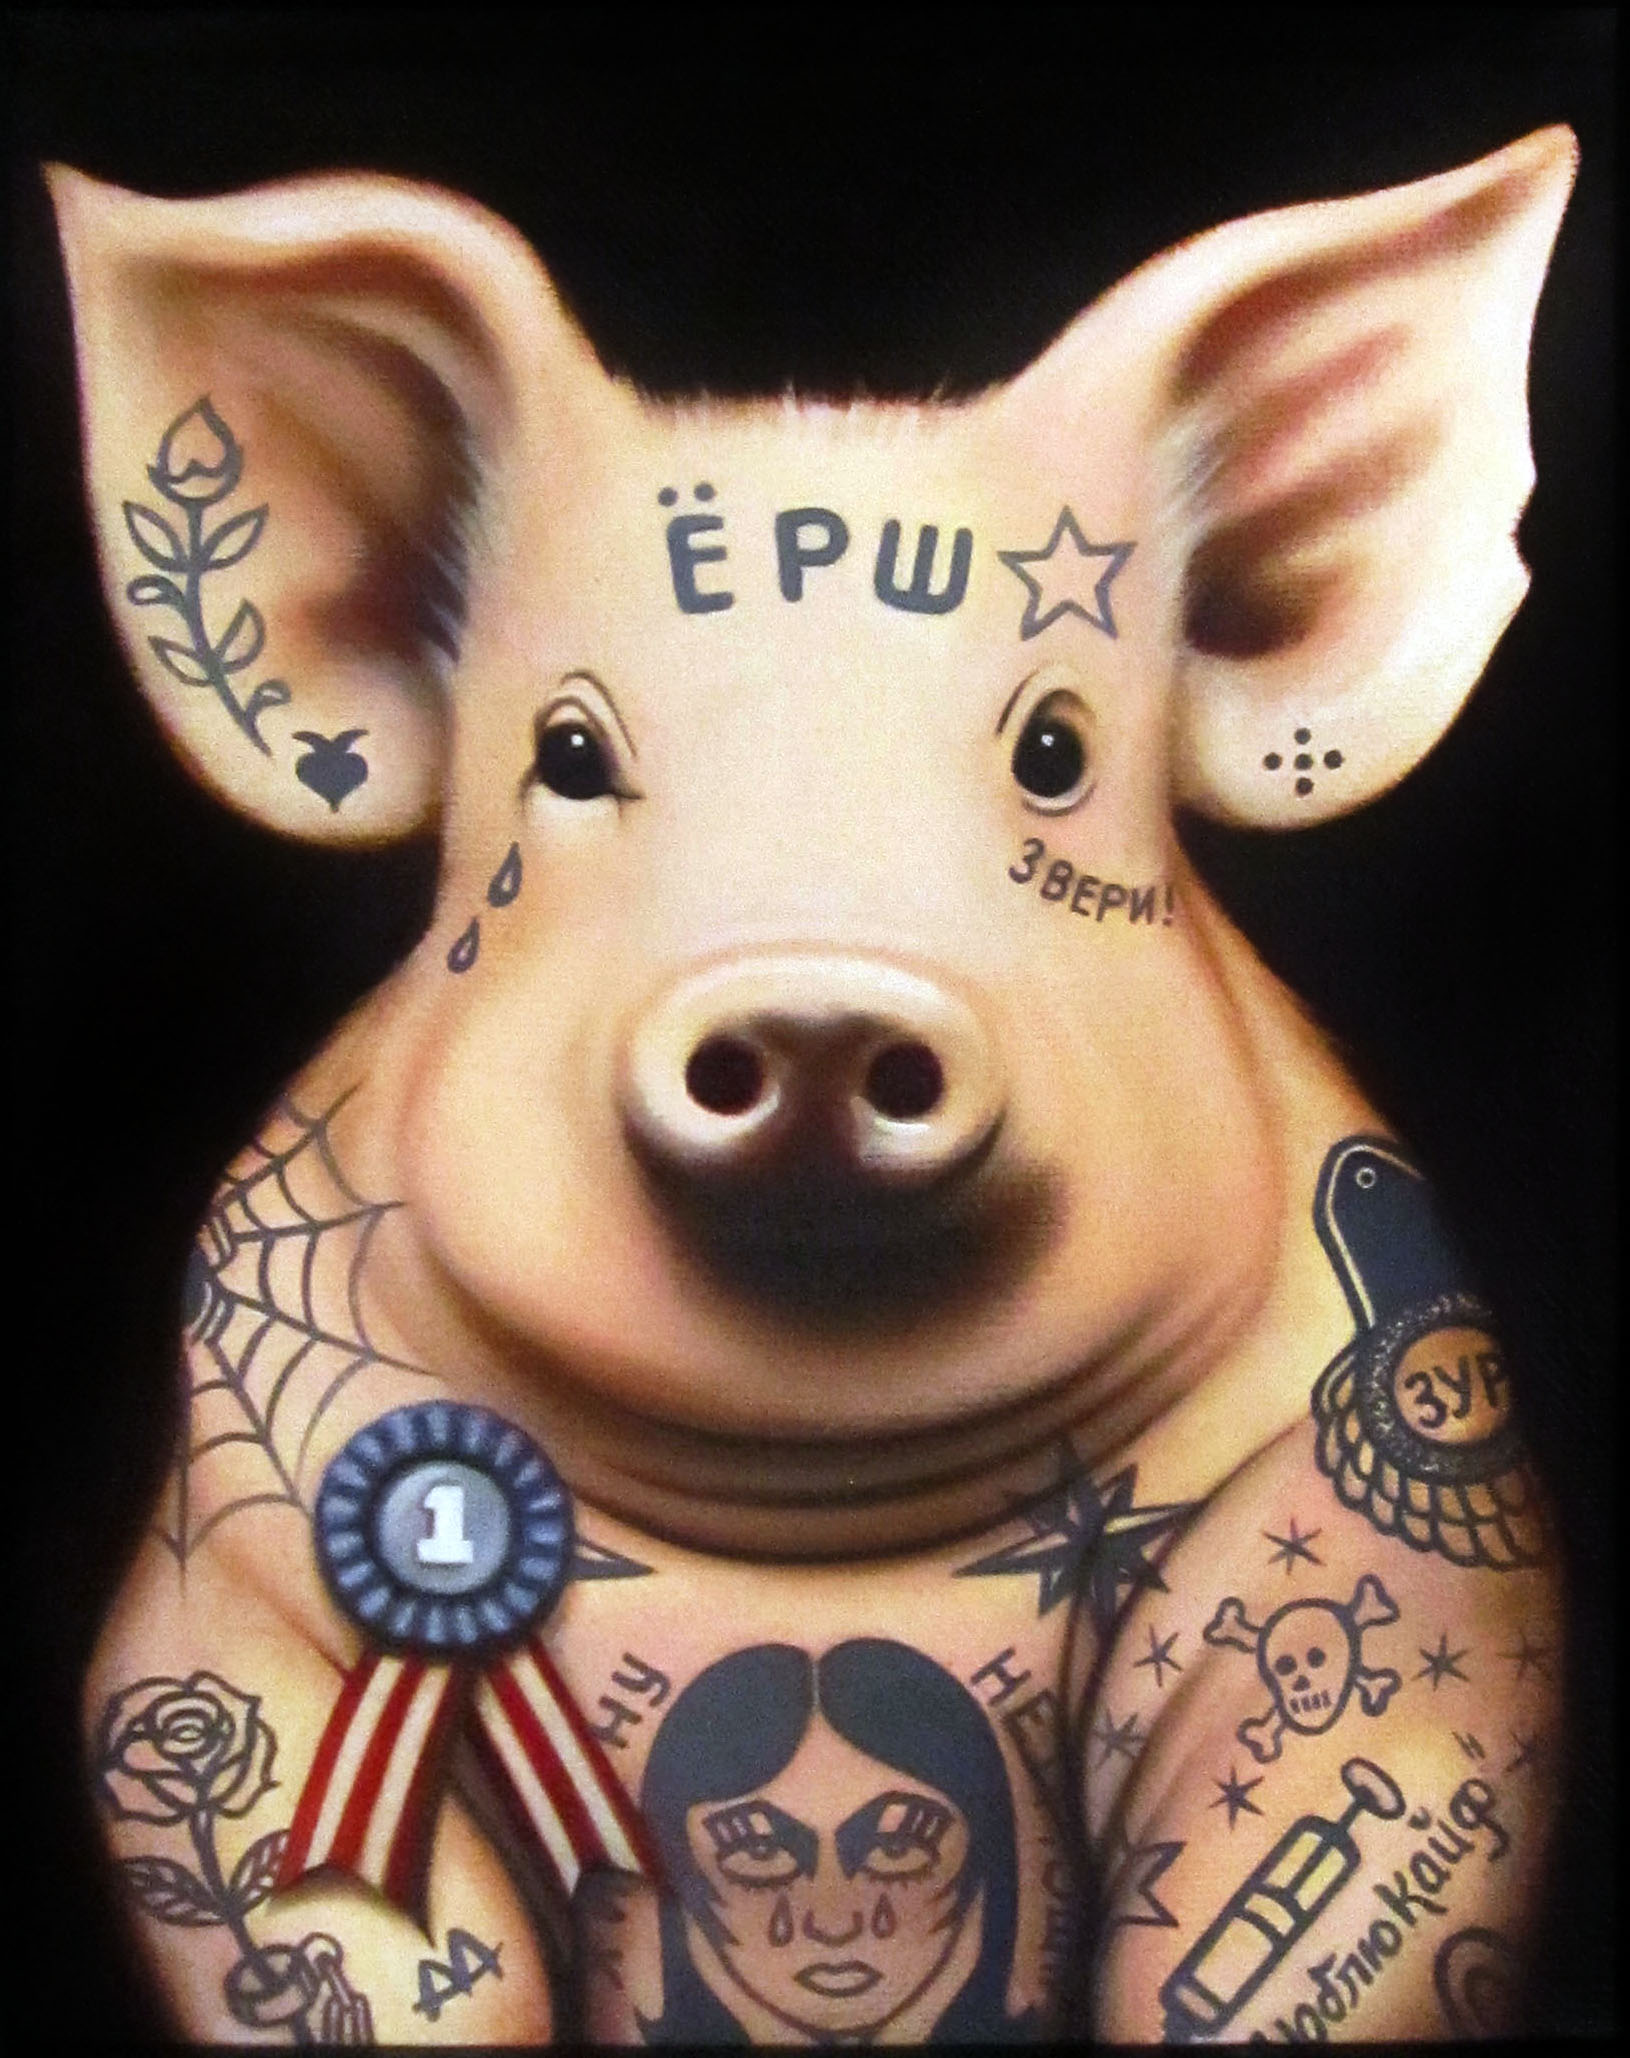 Wimsey the Tattooed Pig